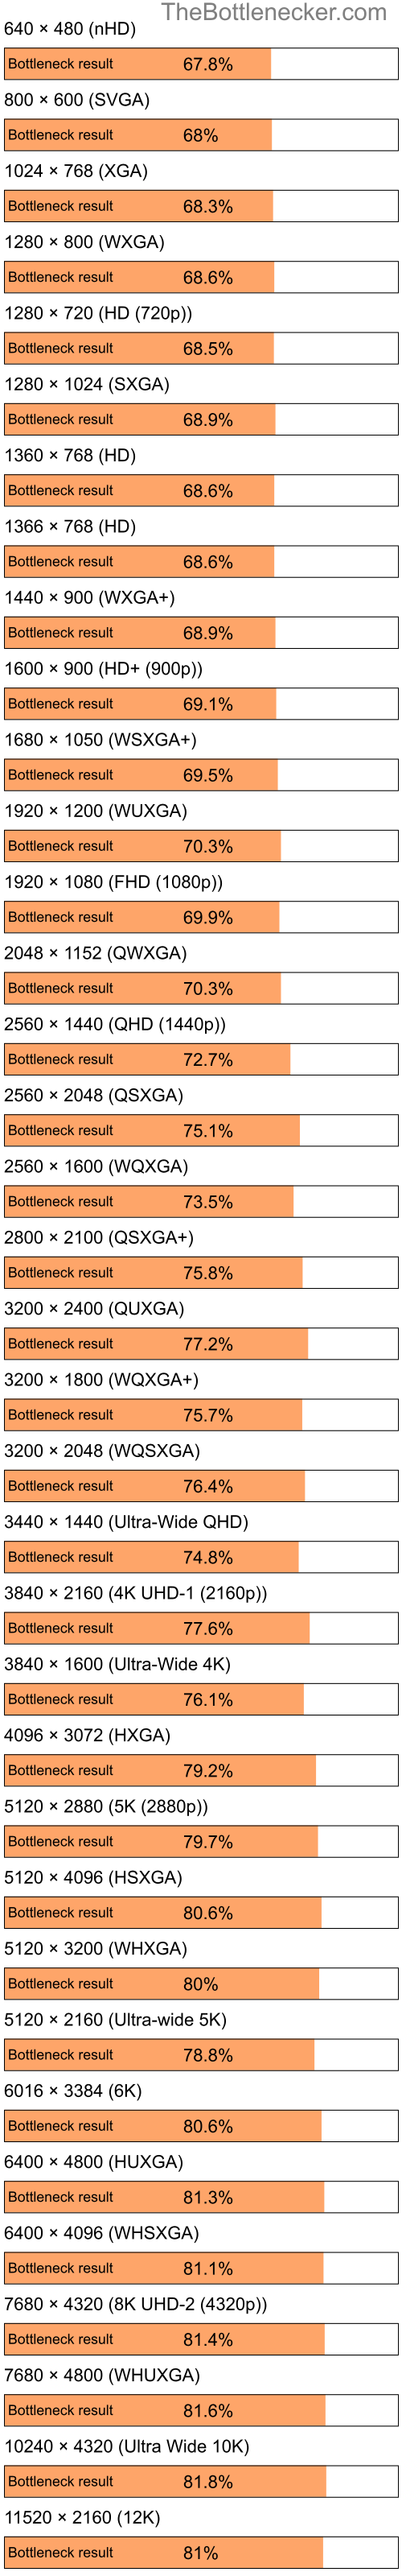 Bottleneck results by resolution for Intel Pentium 4 and AMD Mobility Radeon HD 4225 in General Tasks